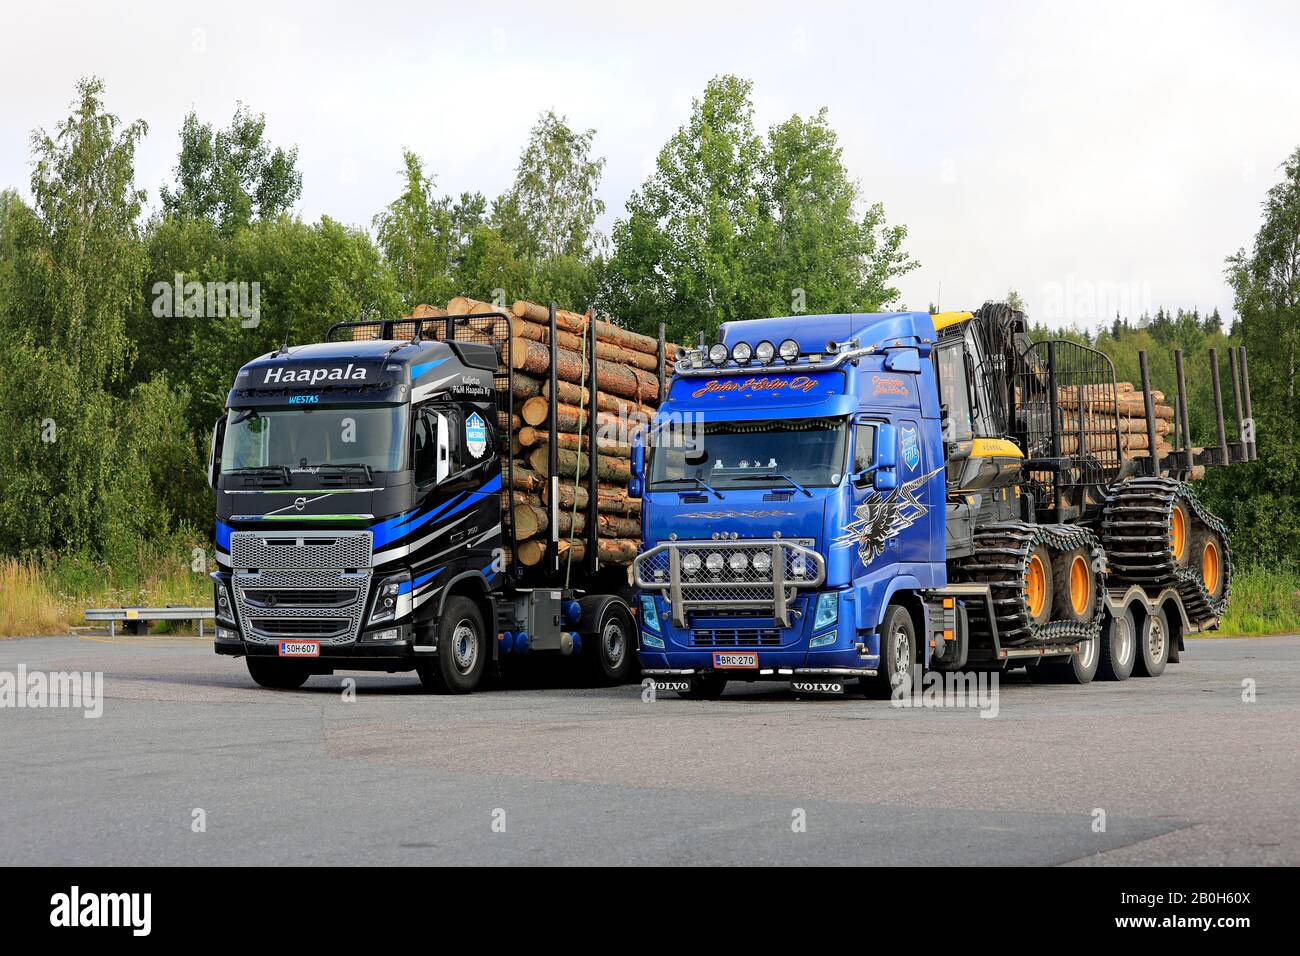 Volvo FH trucks of Haapala pulling a log load and of Juha Holm Oy pulling Ponsse forest machinery, parked side by side. Humppila, Finland. Aug 8, 2019 Stock Photo